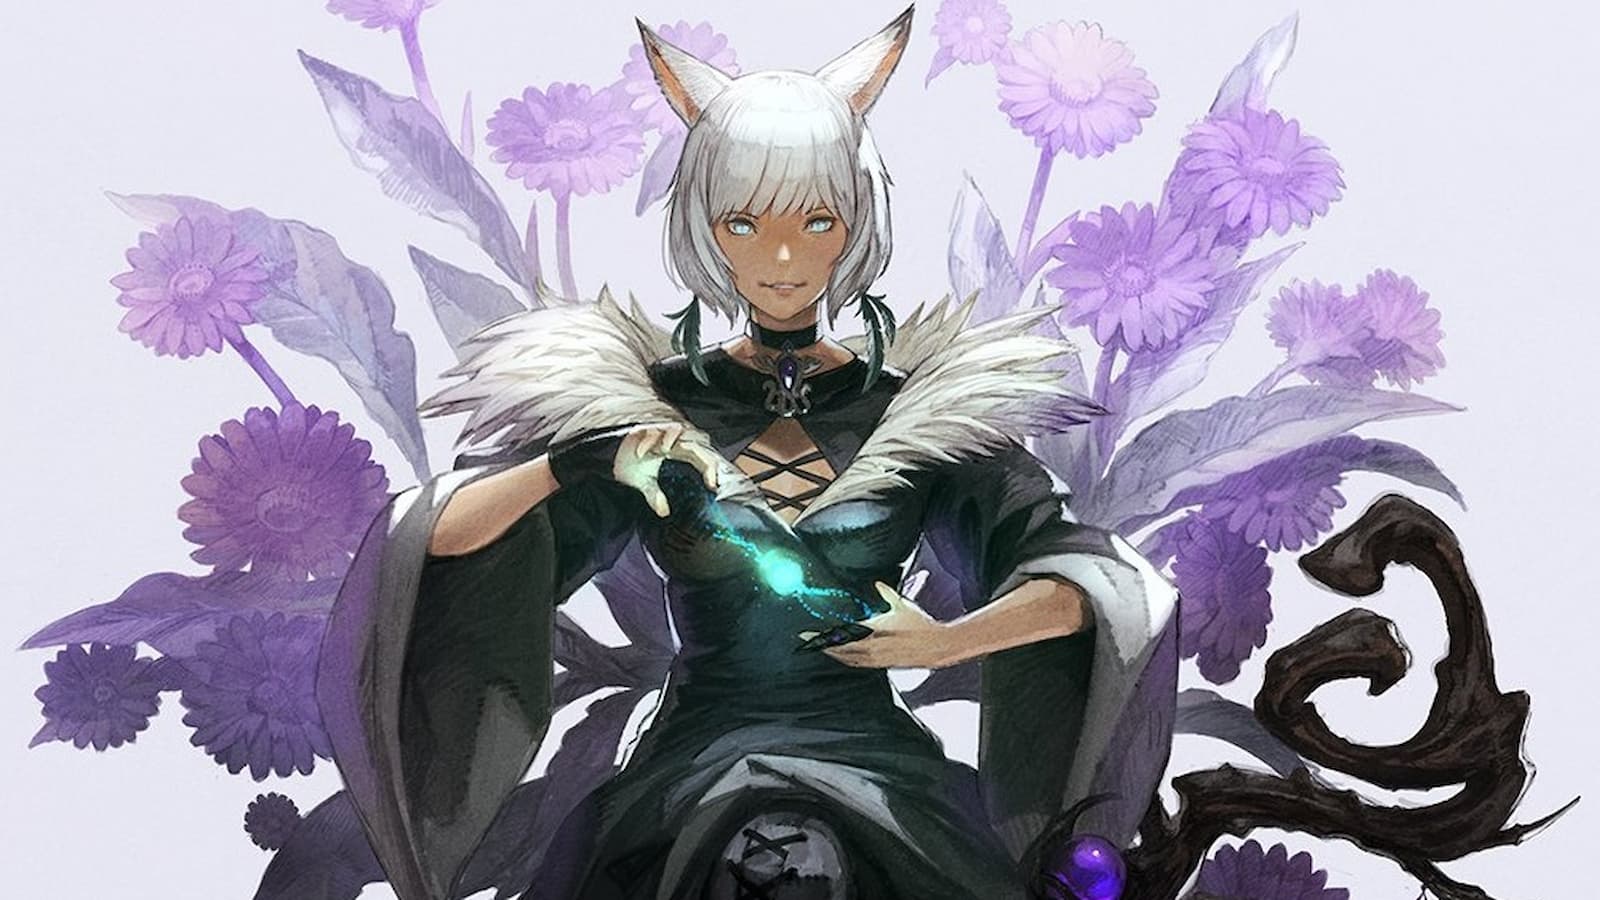 Y'shtola of the Scions of the Seventh Dawn in FF14